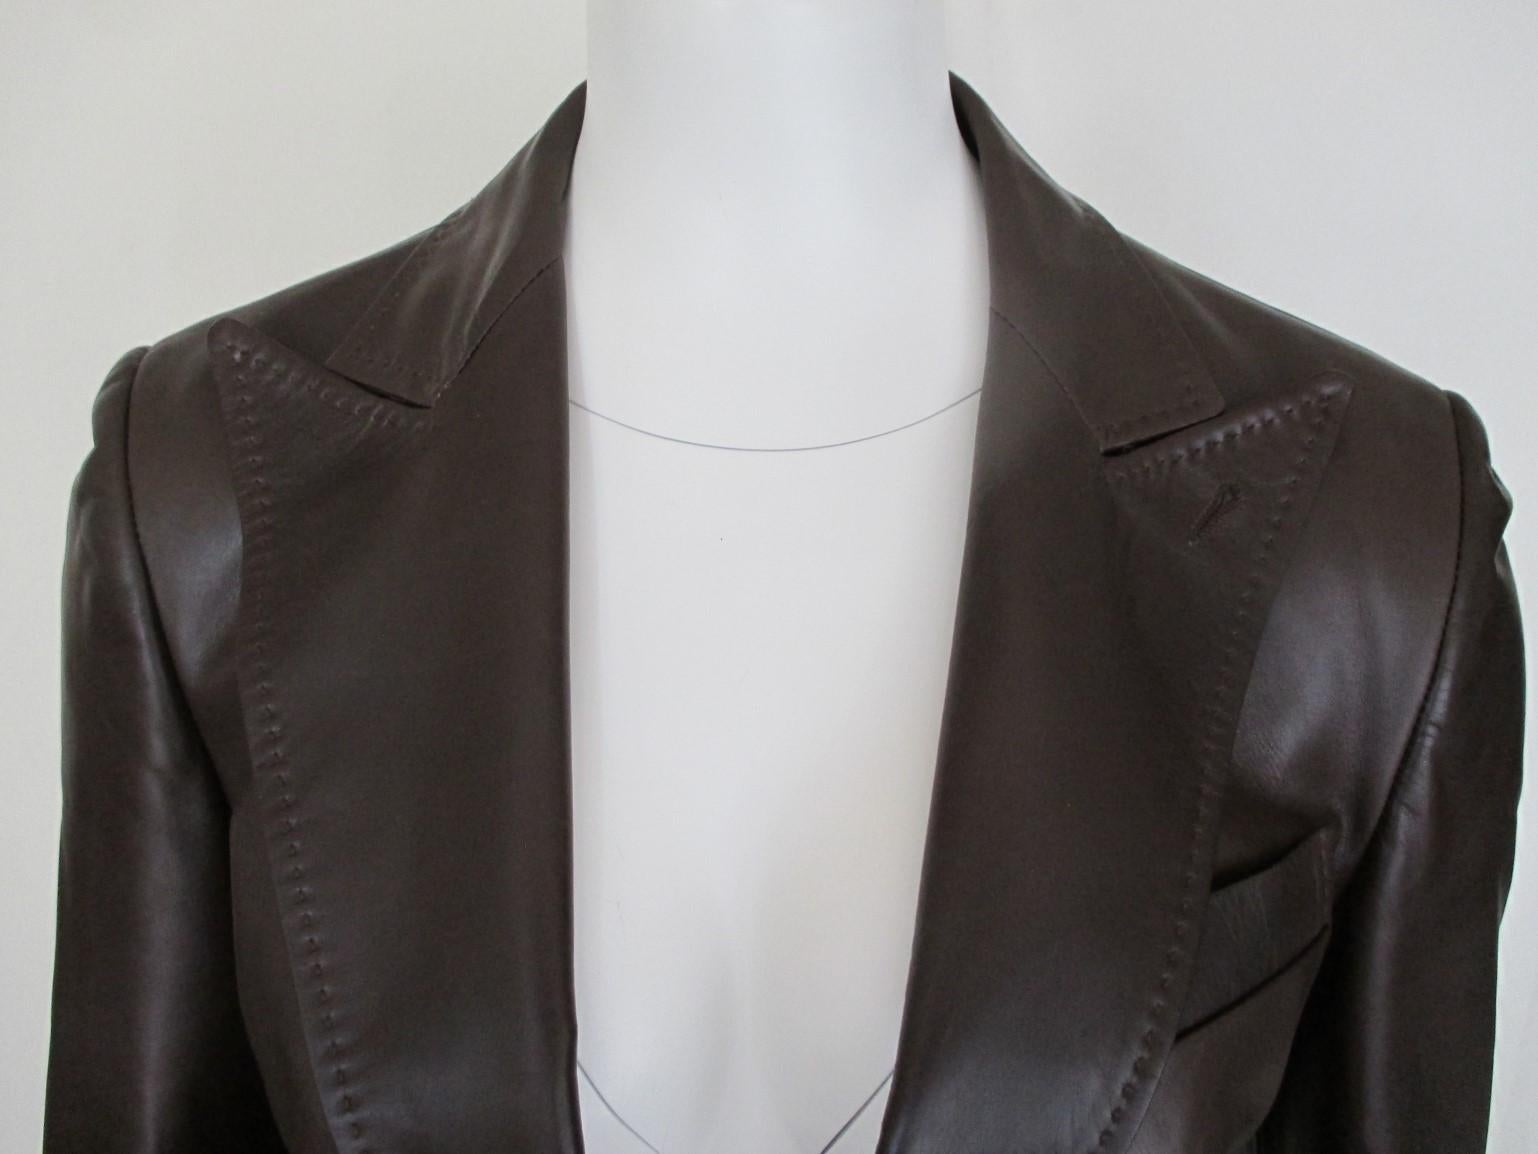 This Gucci  jacket is made of brown leather and has 1 button and 2 pockets.
In very good pre-owned condition.
The size is mentioned Italy 42 / fits about US 6-8 / EU 38, see section measurements.
Please note that vintage items are not new and